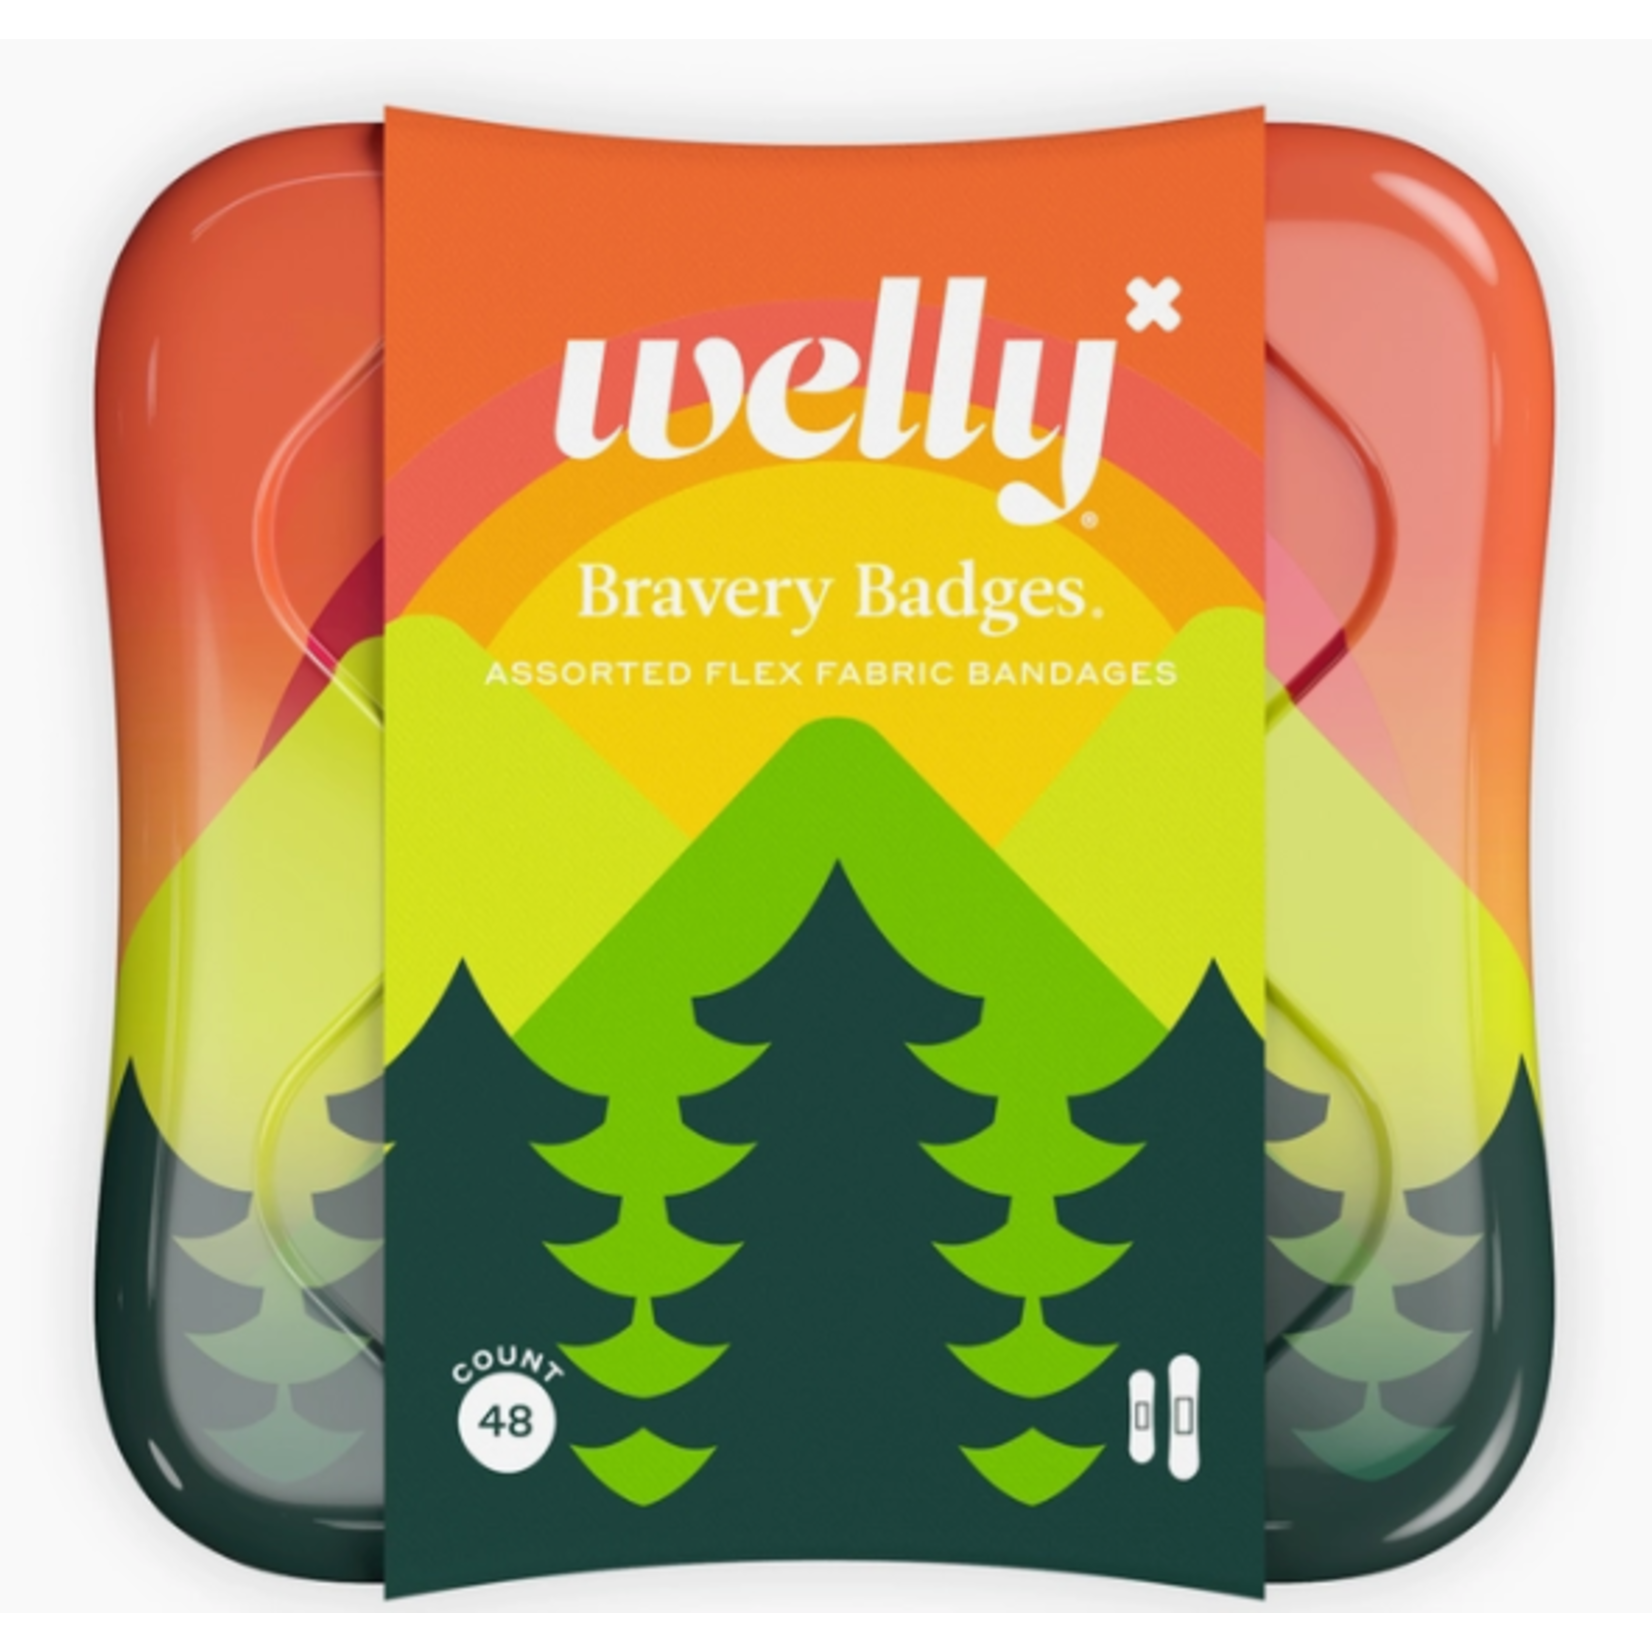 Welly Fabric Bandages Bravery Badges - Camping